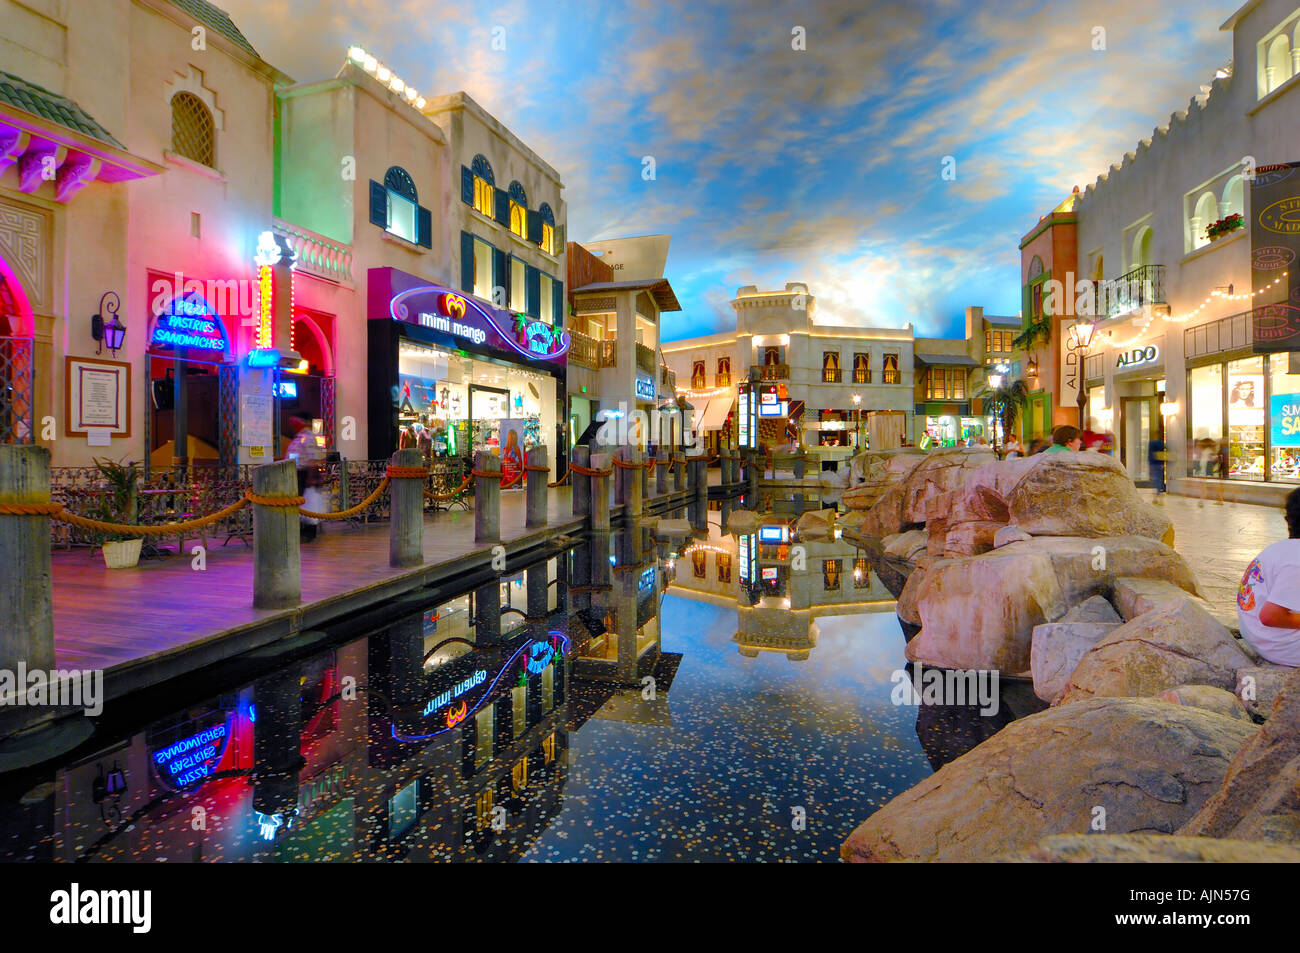 Planet Hollywood Shopping Mall Showing Shops And Moroccan Arabic